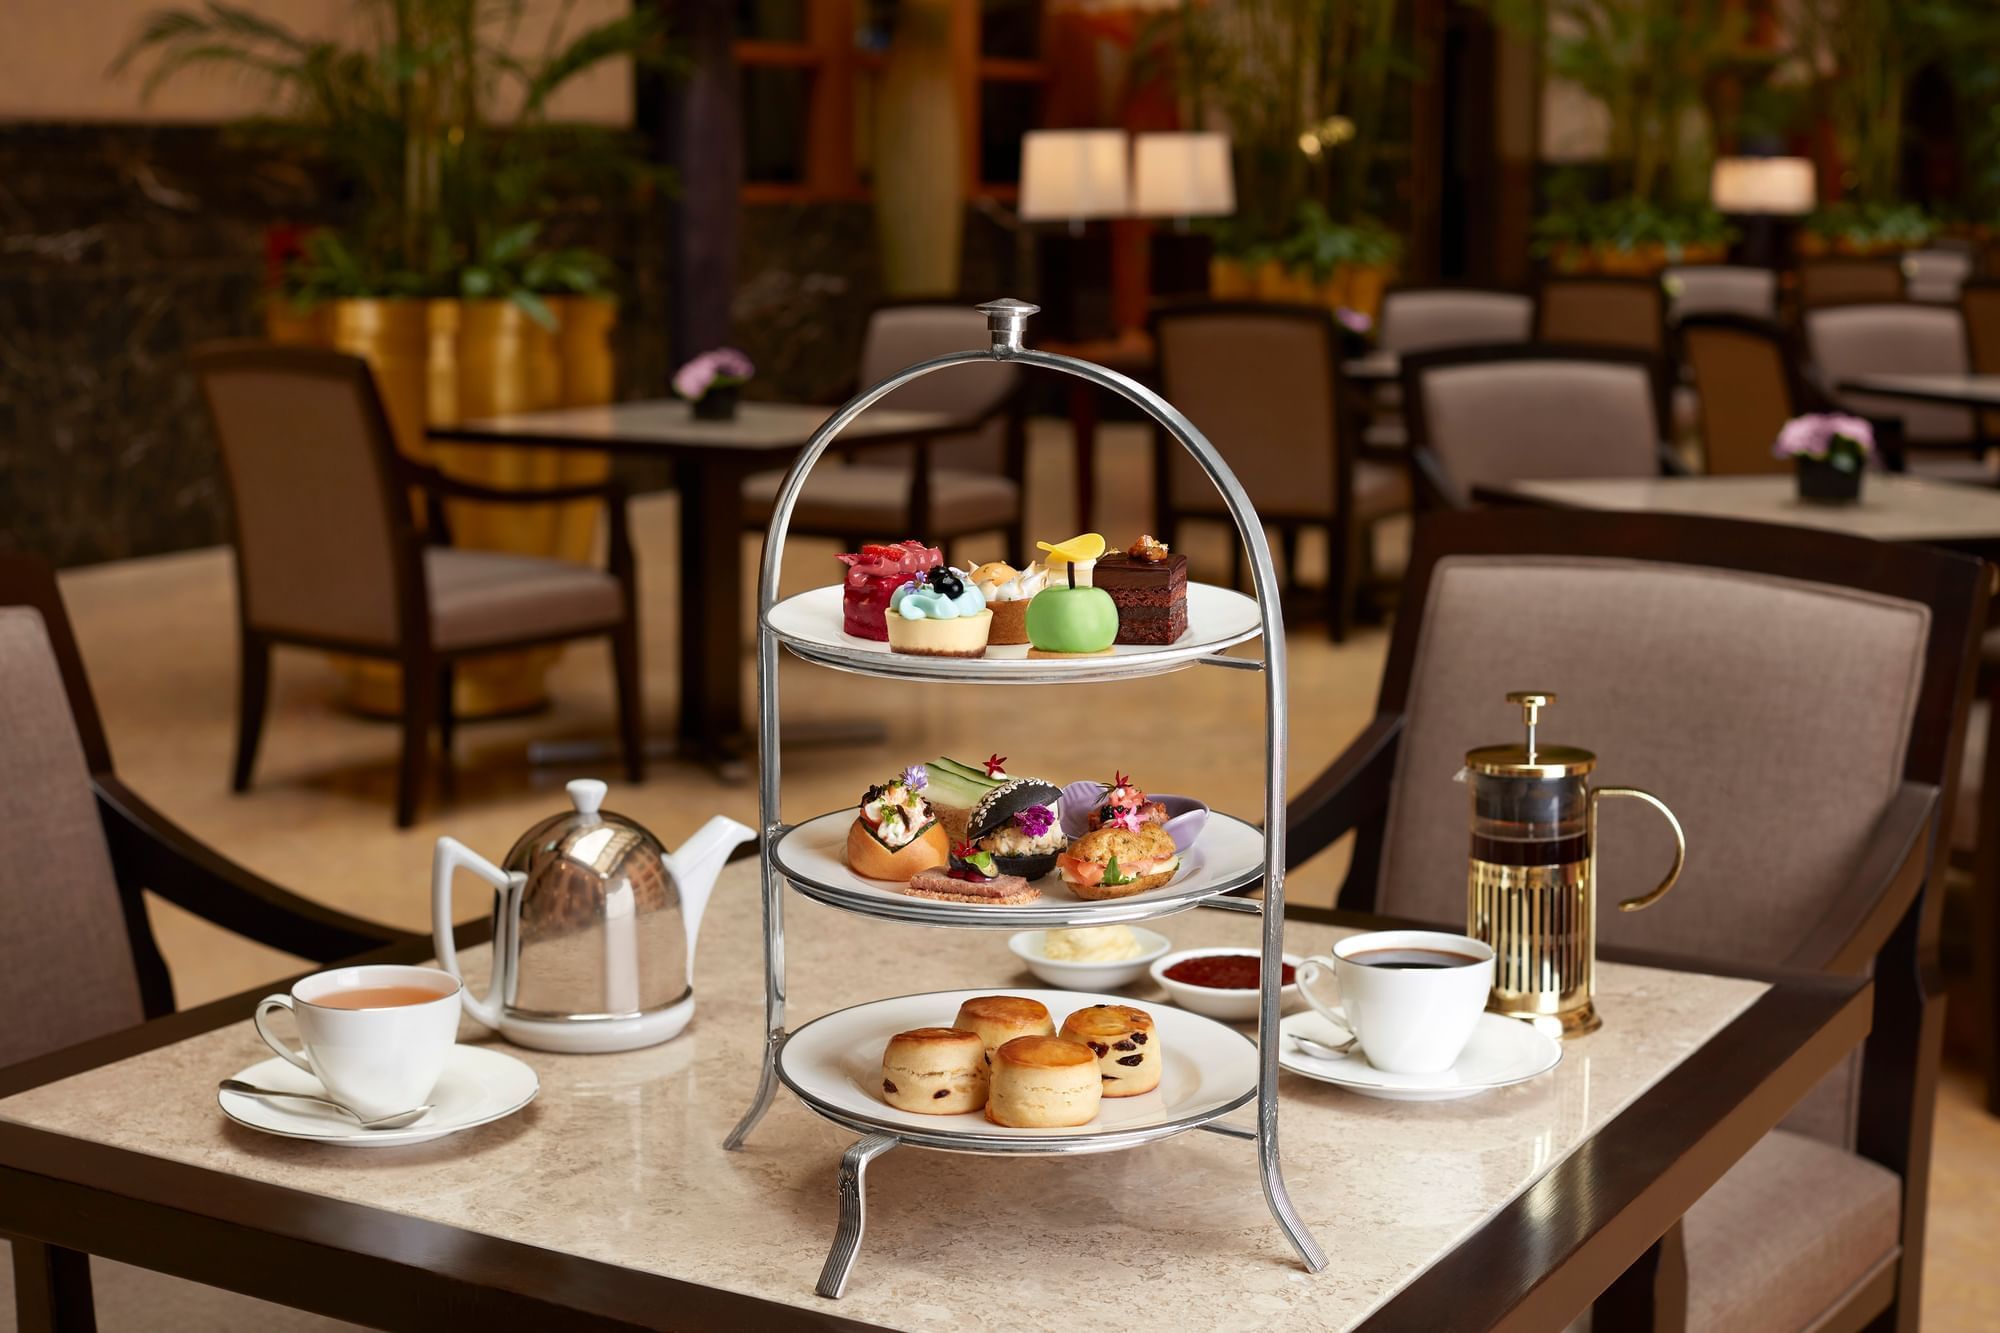 High tea platter with desserts and beverages served in The Courtyard at The Fullerton Hotel Singapore